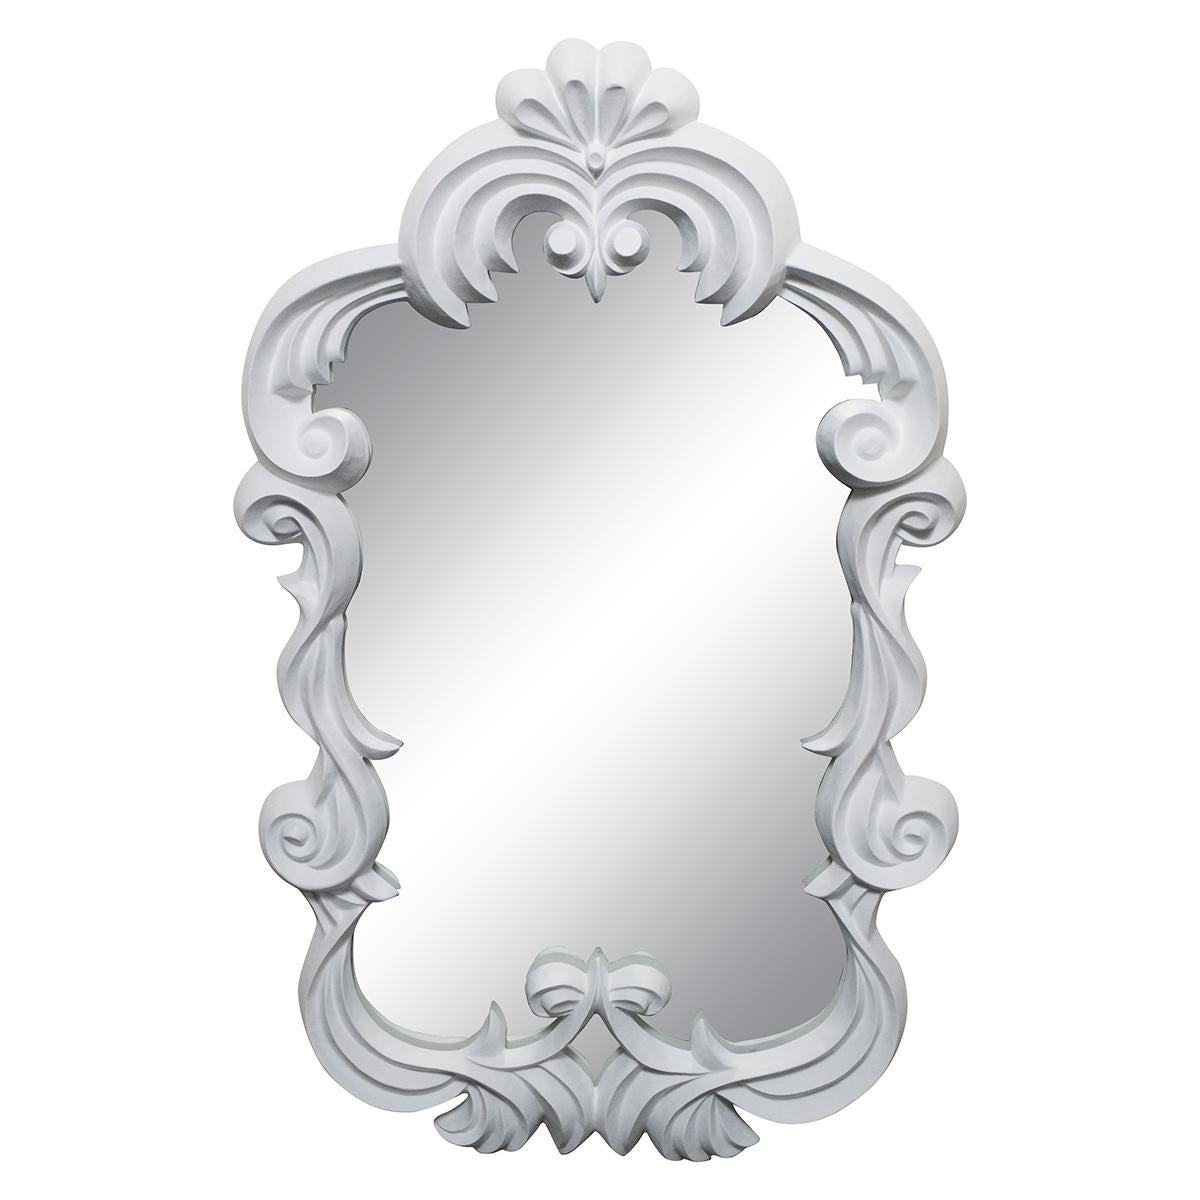 Carved wood mirror with scrolled 